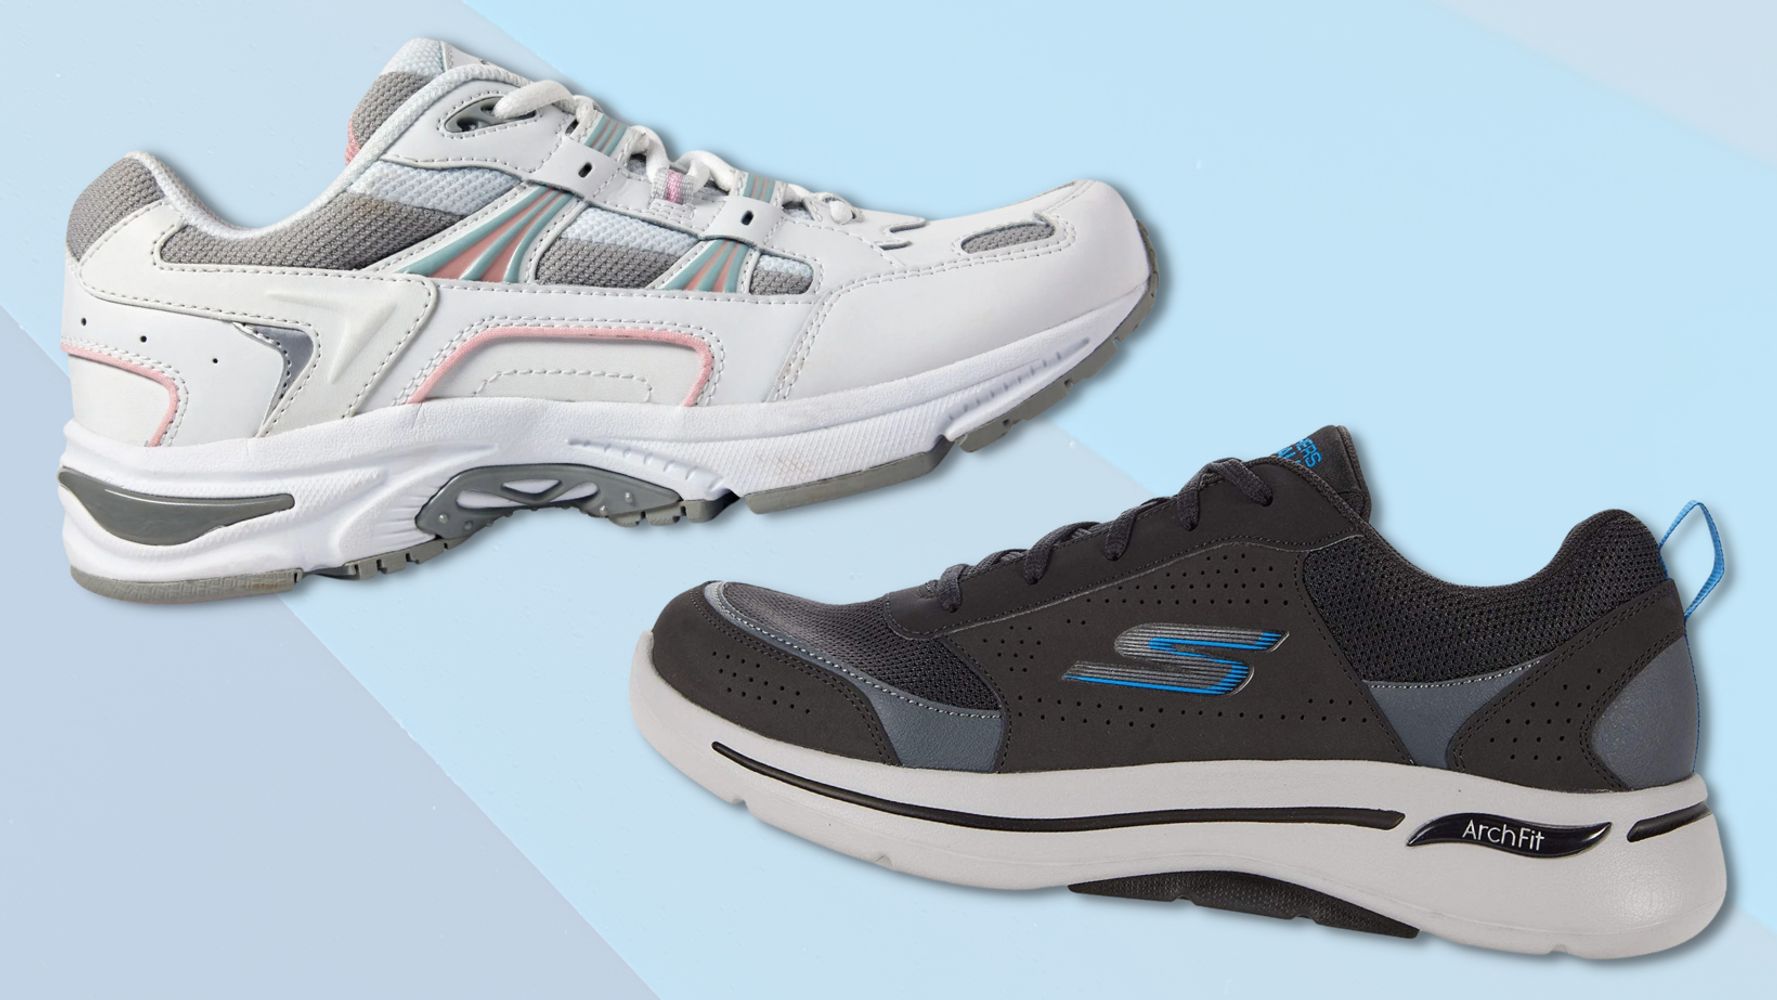 Cuña Posicionar Tutor 9 Best Podiatrist-Recommended Walking Shoes For Older Adults | HuffPost Life